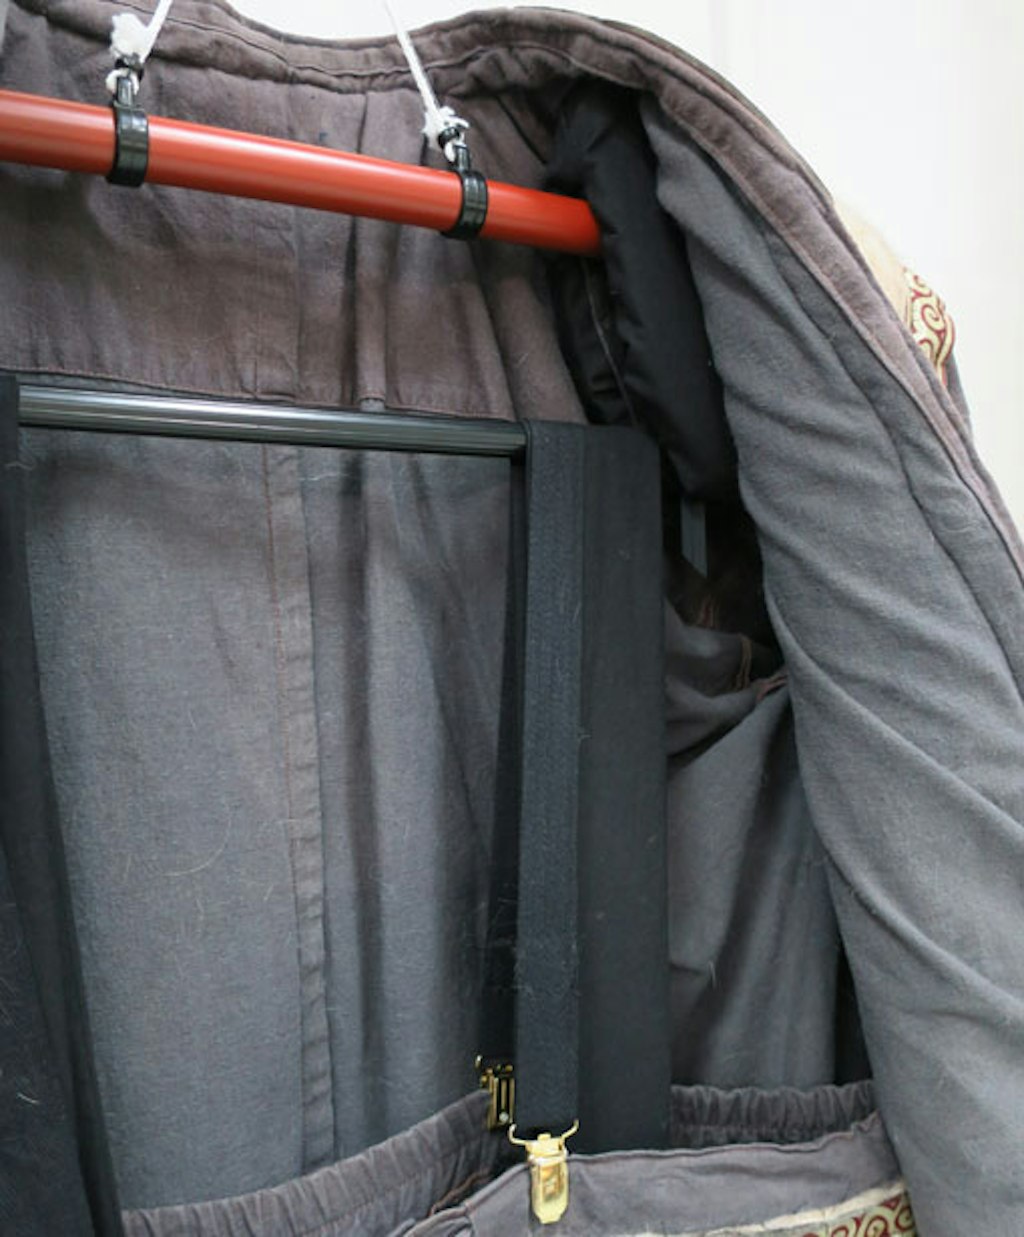 The display hanger with additional supports for the coat and pants